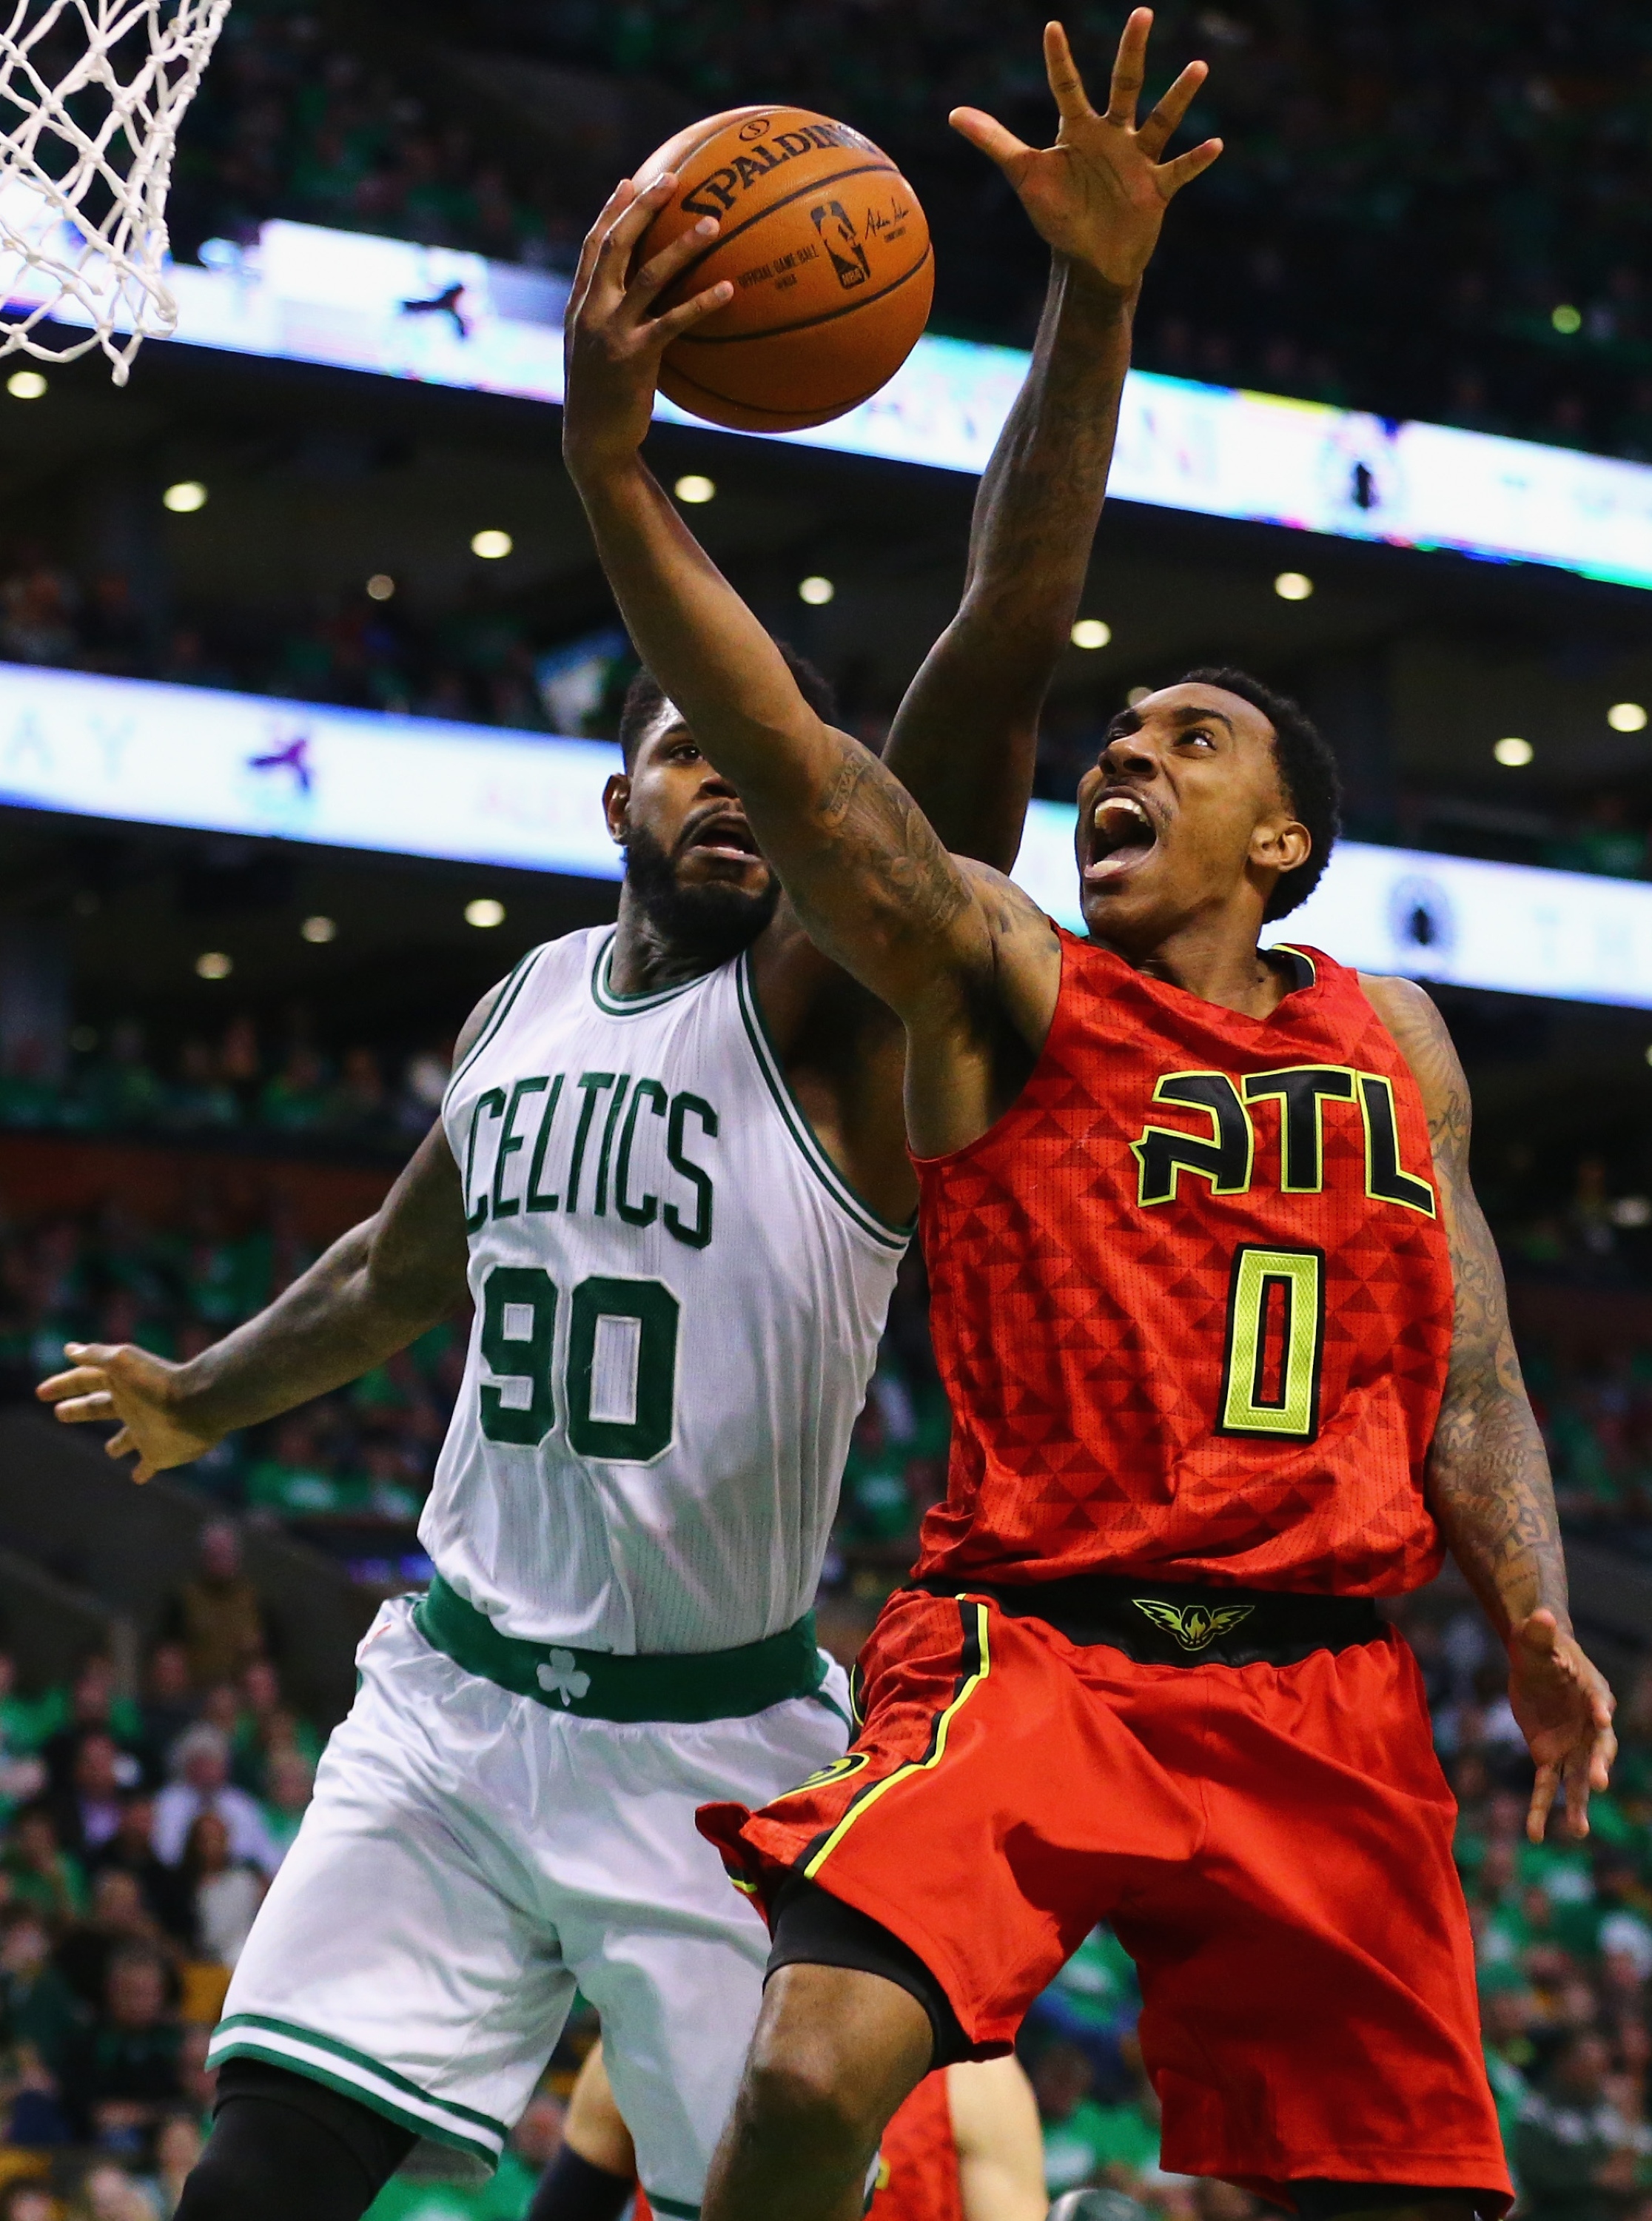 Jeff Teague attempts to score against the Celtics on an injured knee. (Maddie Meyer/Getty Images)